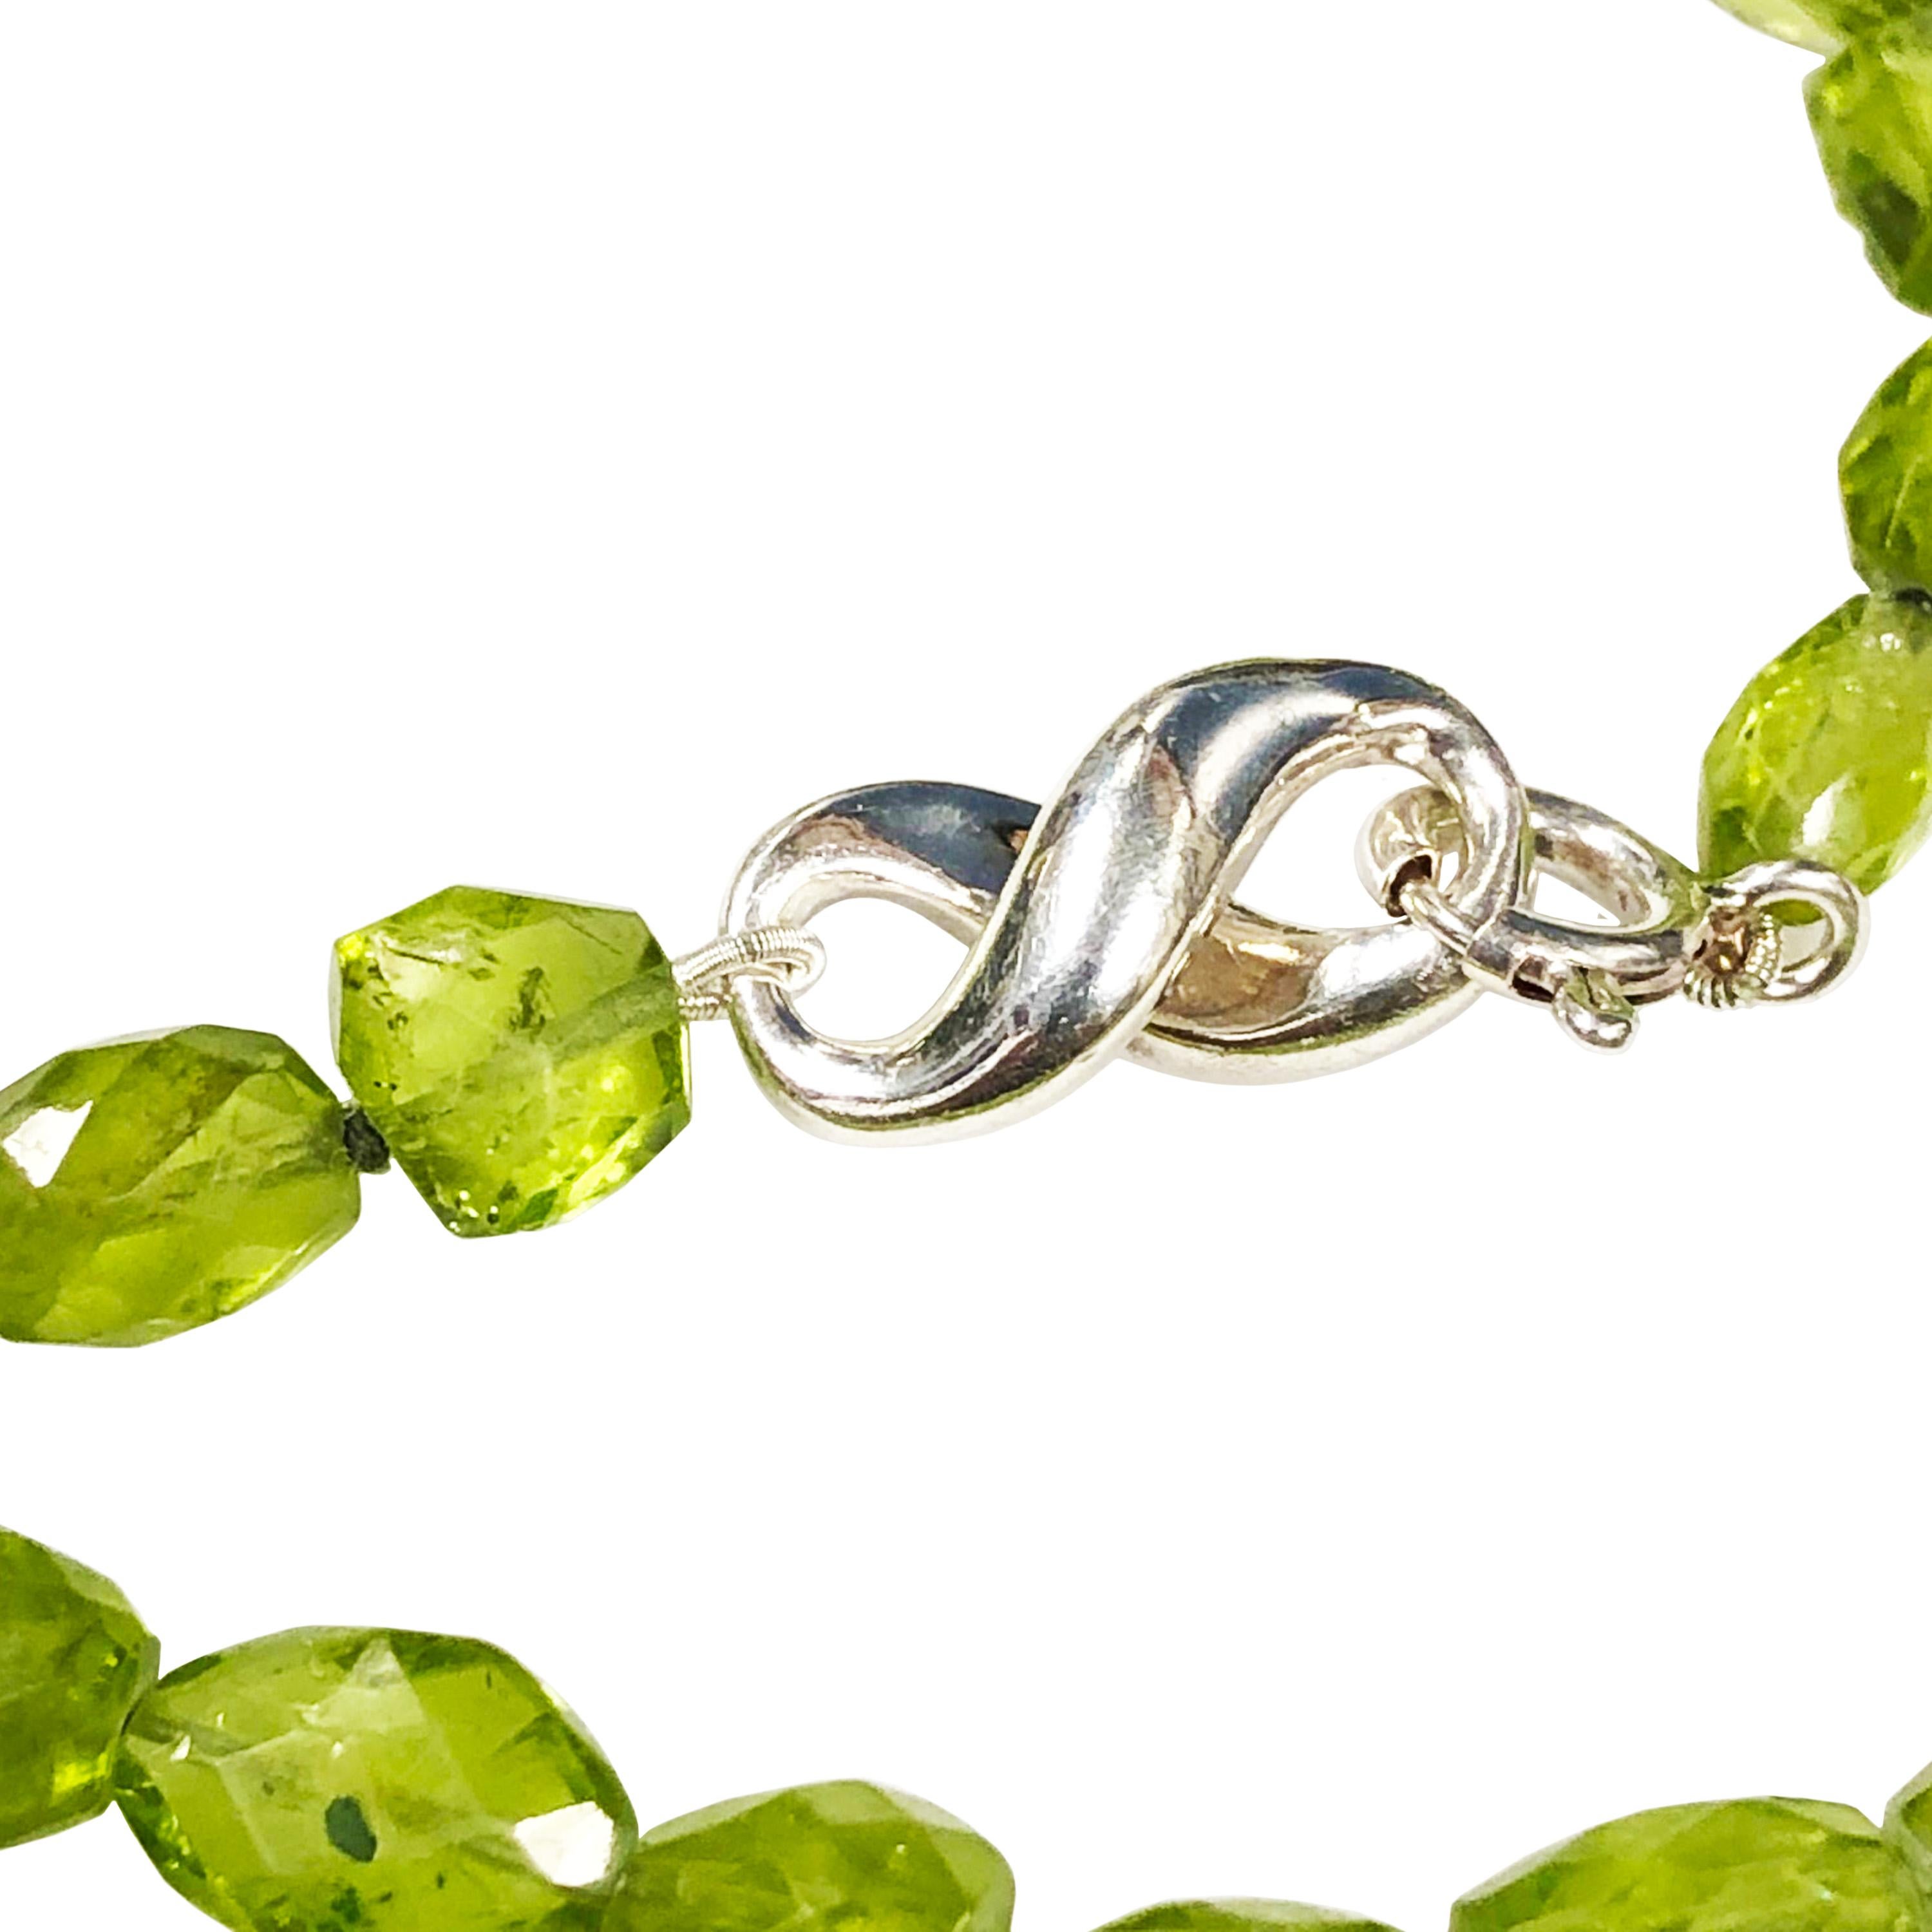 Circa 1999 Tiffany & Company 54 inch necklace comprised of faceted, graduated Peridot Beads measuring in size from 8 to 18 MM.  Sterling silver Signed Tiffany Clasp that is dated 1999. From a very limited produced collection, comes in the original